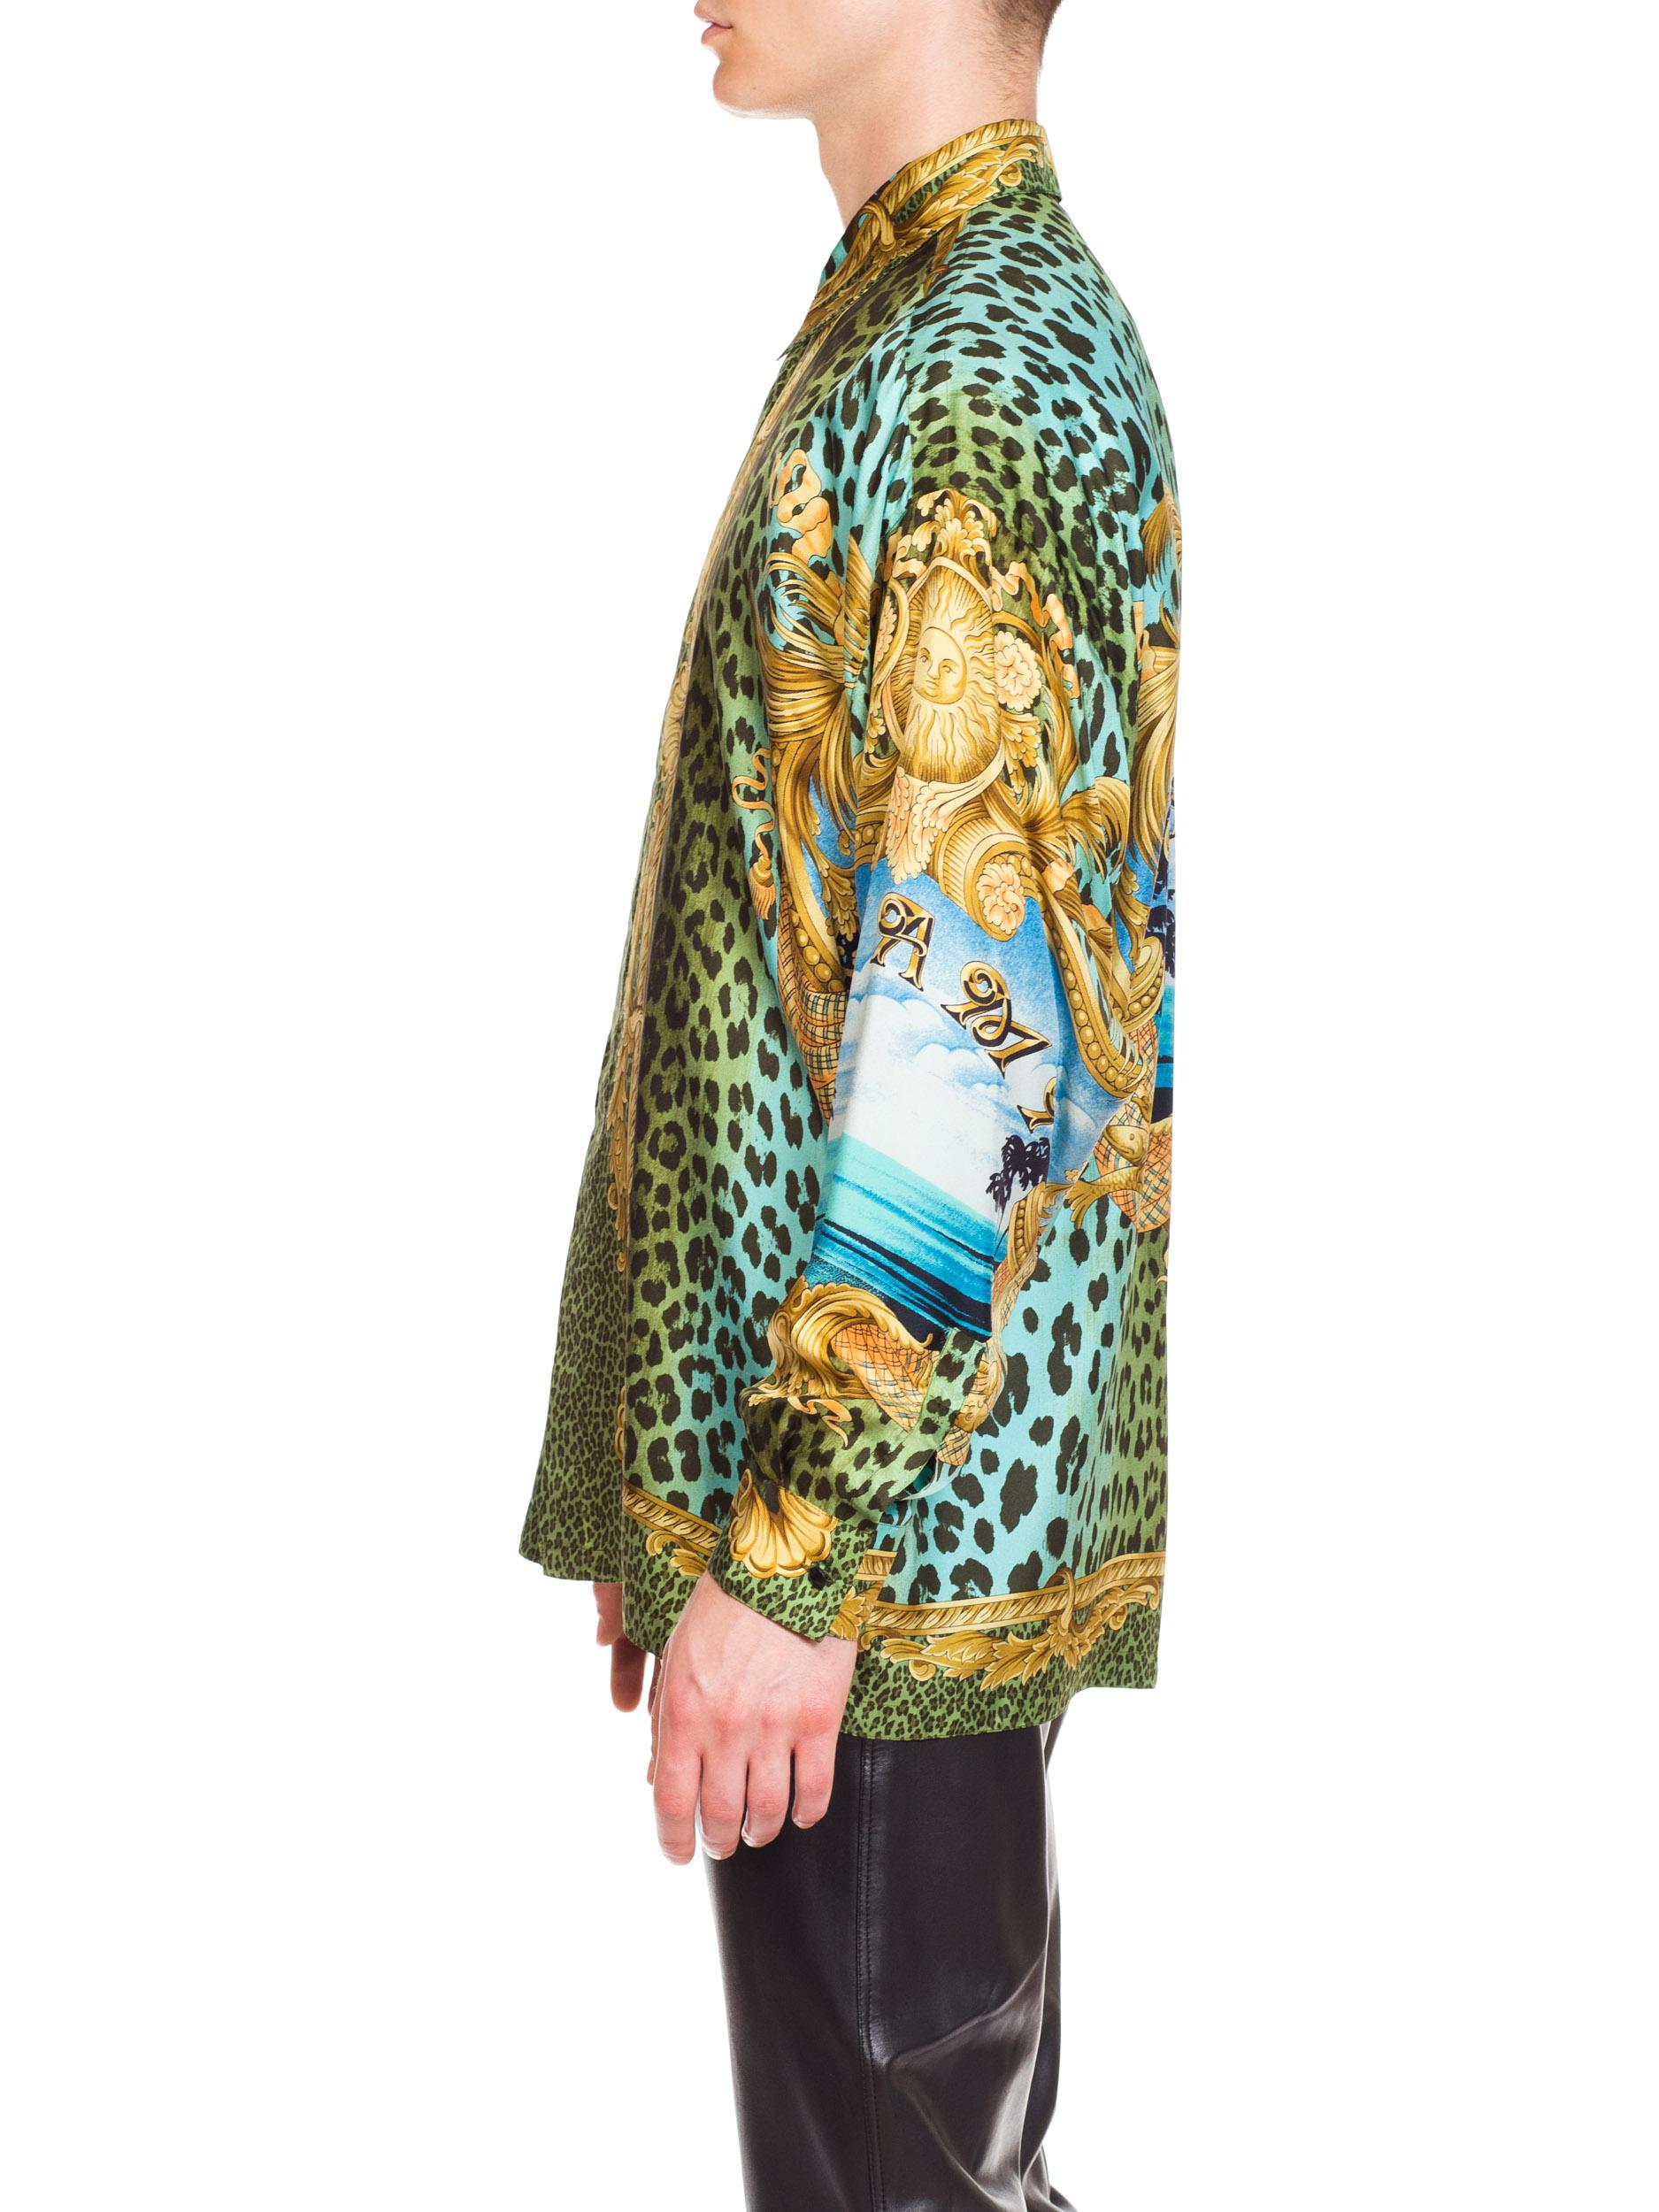 Gianni Versace Miami Leopard Baroque Silk Shirt, 1990s  In Excellent Condition In New York, NY